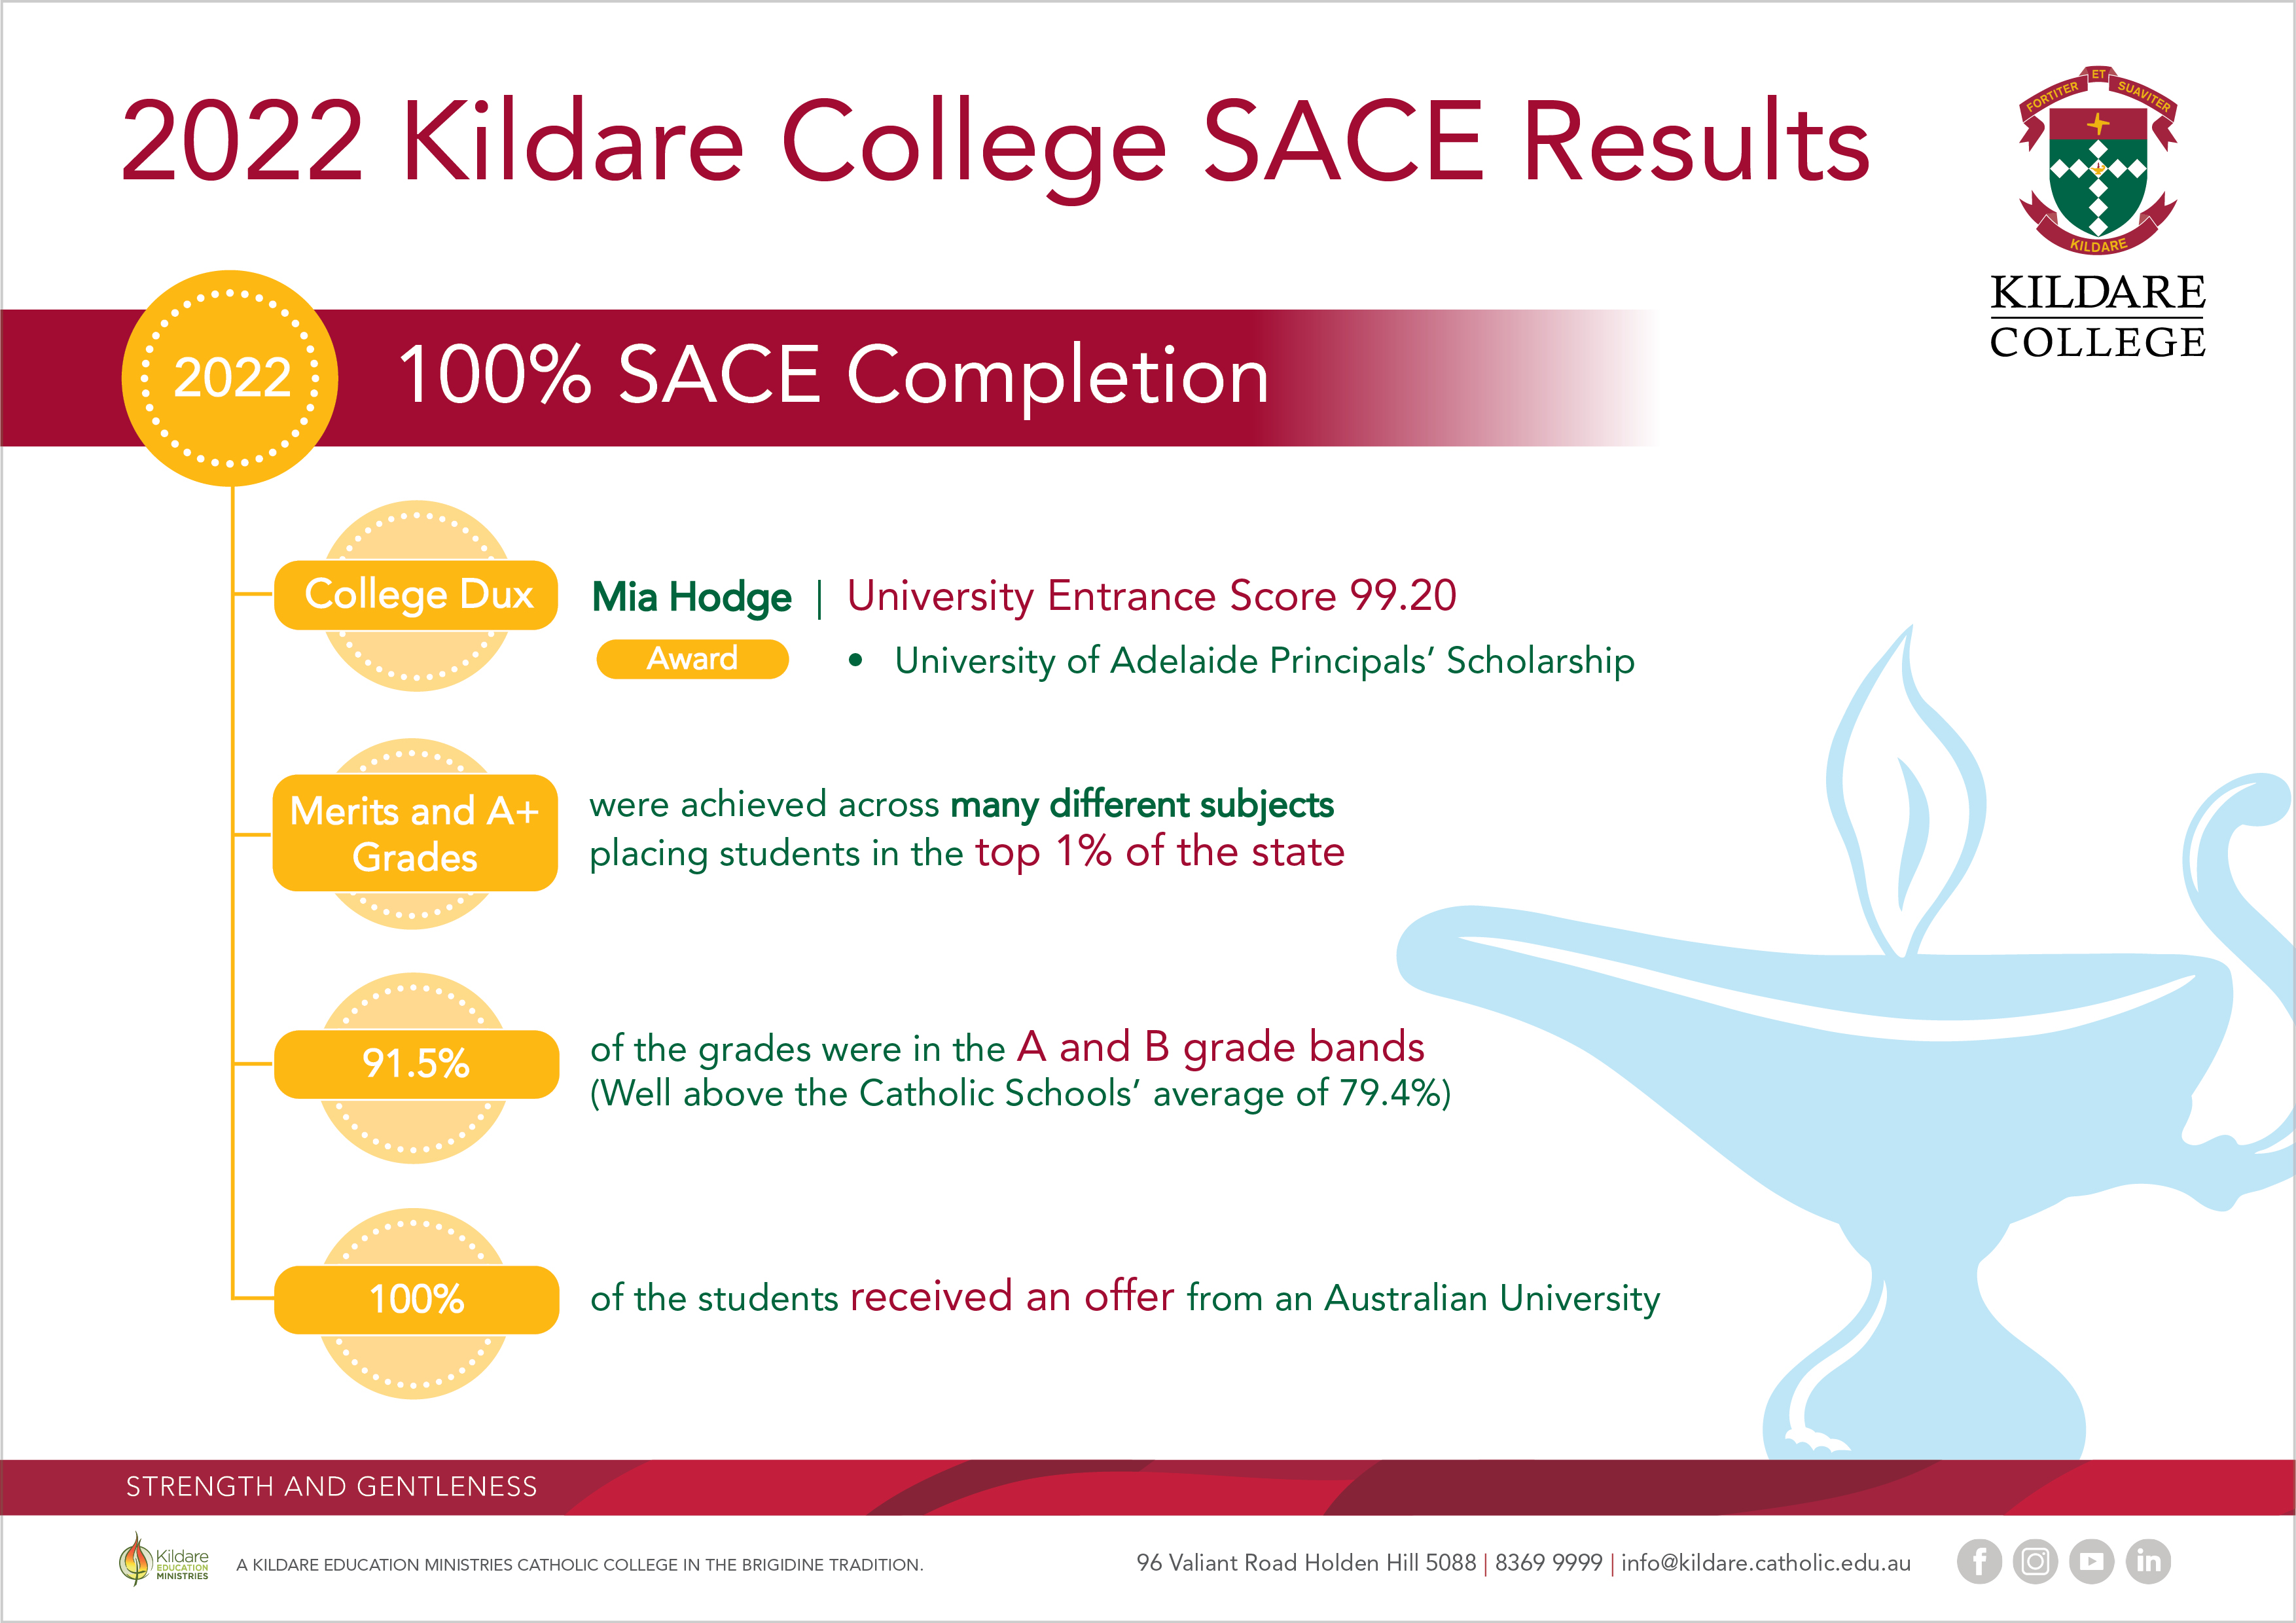 <span class="text-center">Kildare College would like to congratulate the Class of 2022 for their outstanding SACE results.</span>